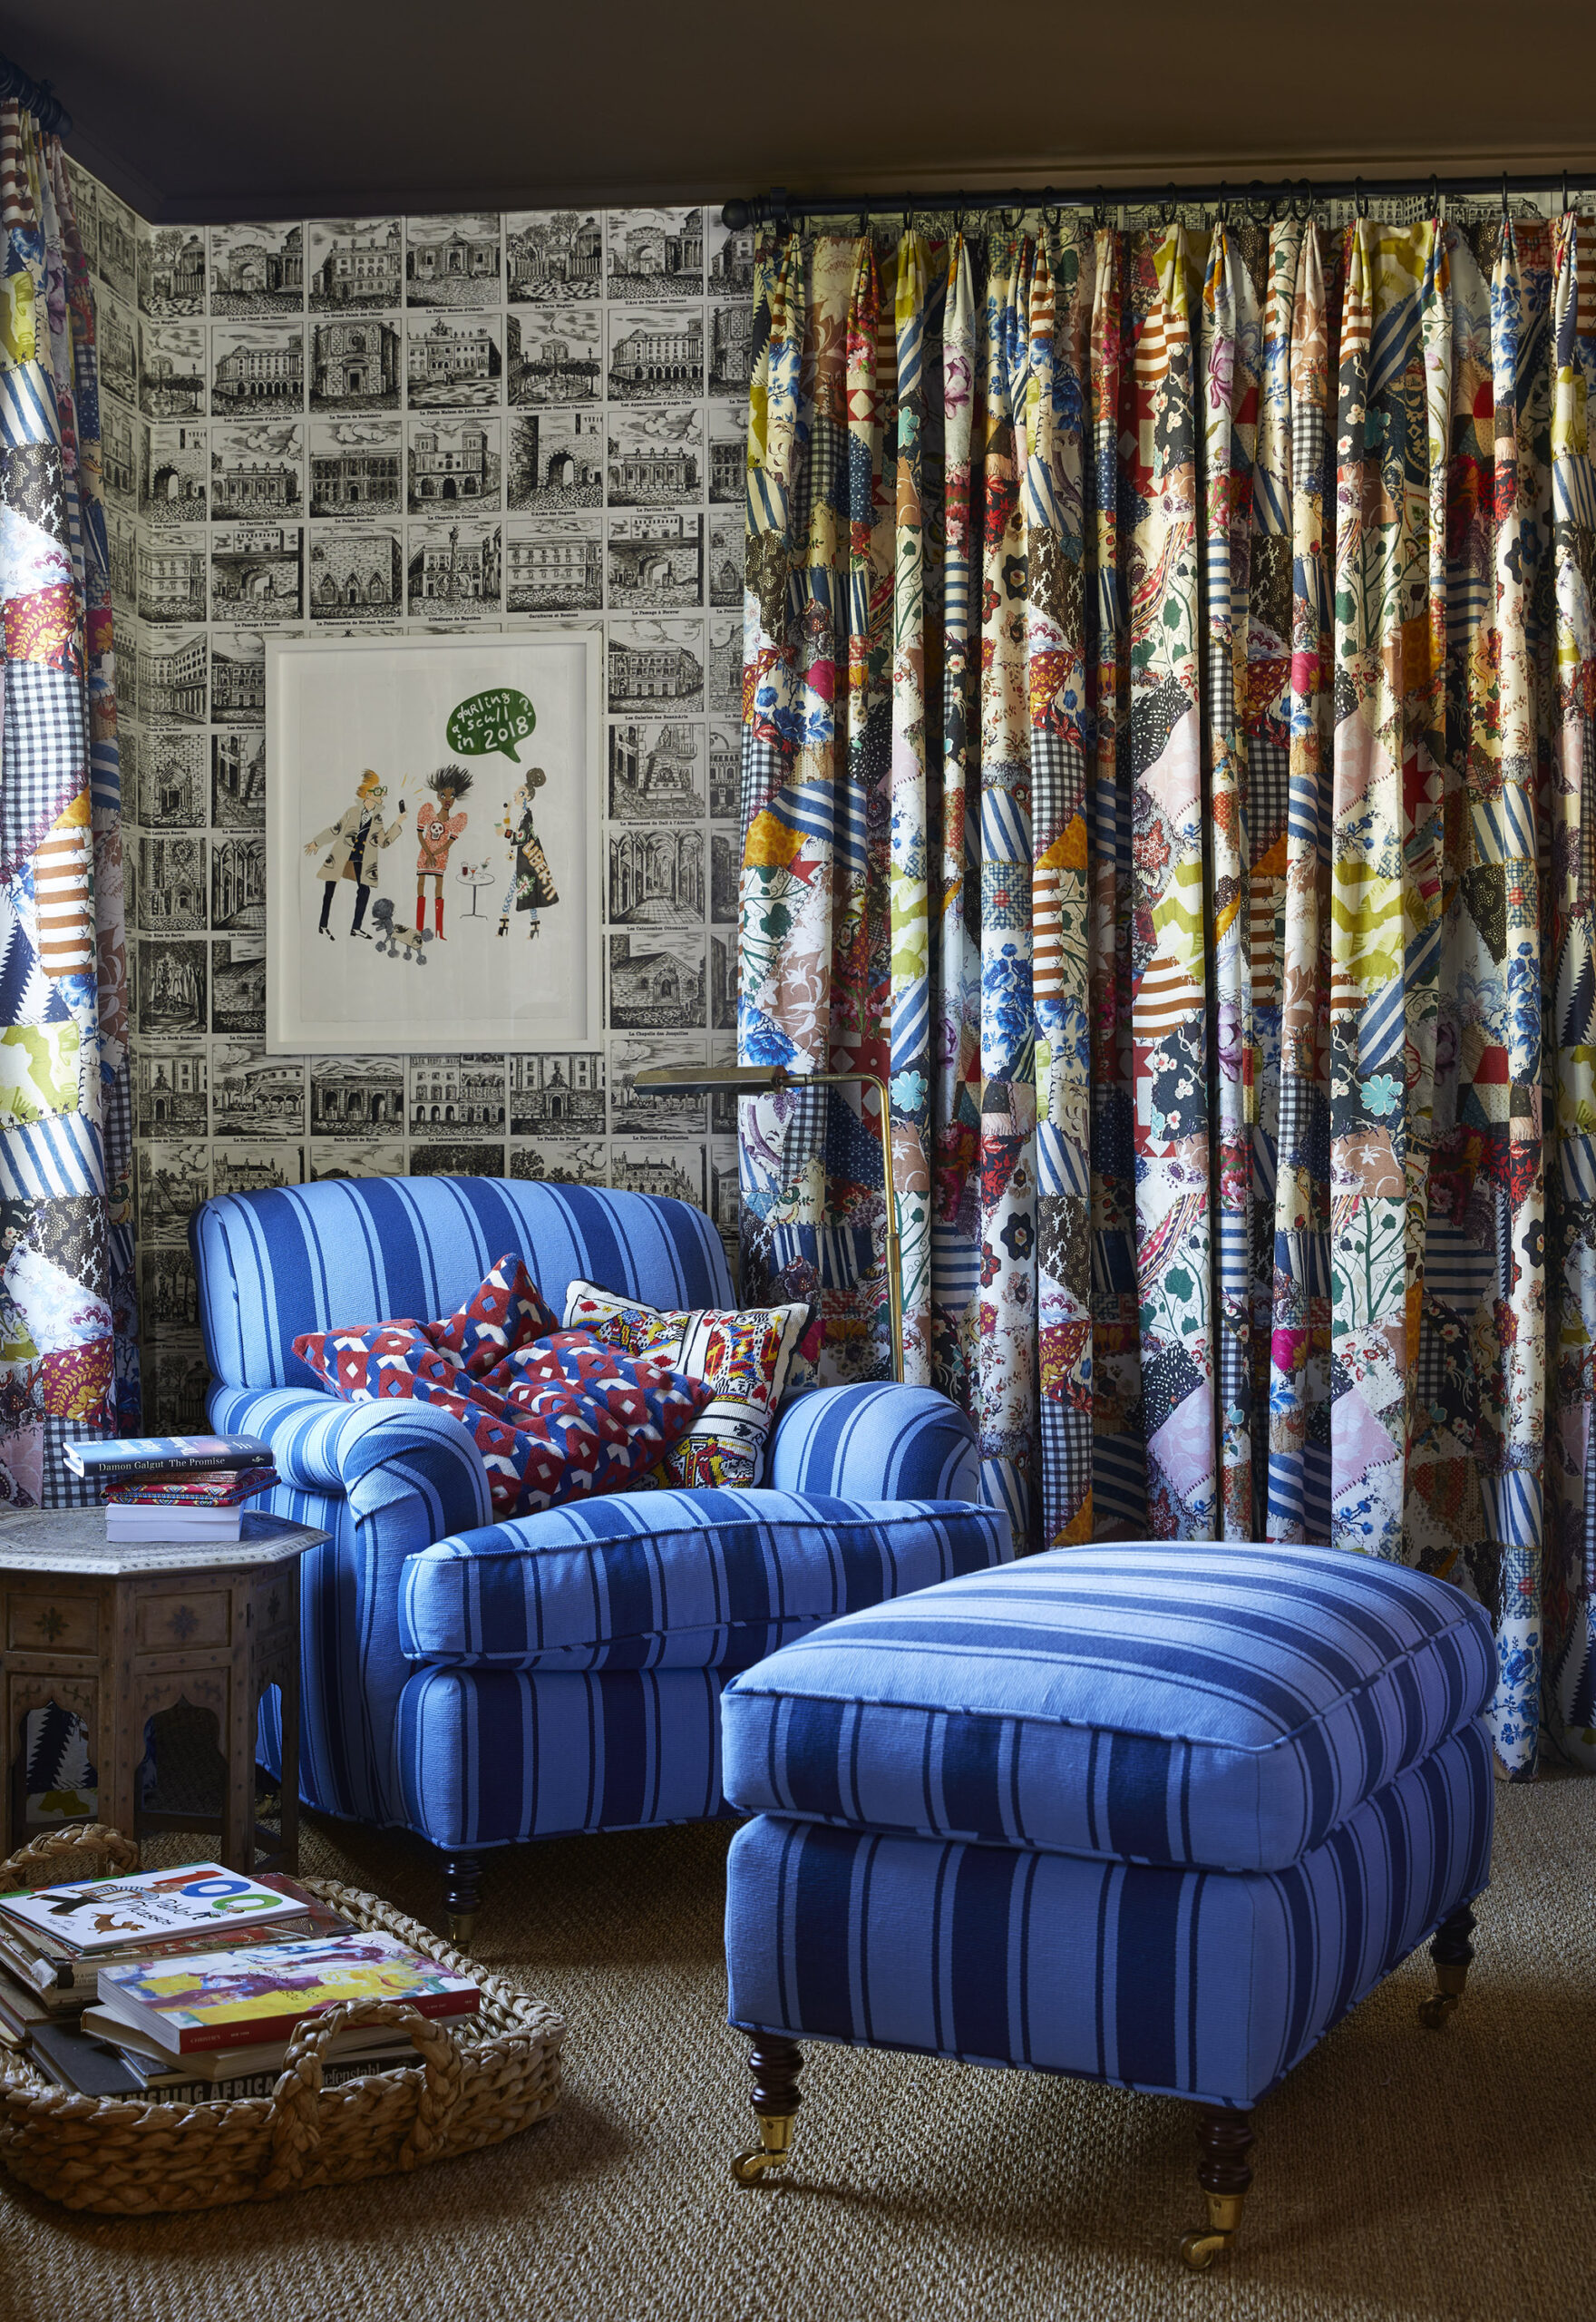 Johnson Hartig for Libertine for Schumacher Bedroom With Armchair and Curtains